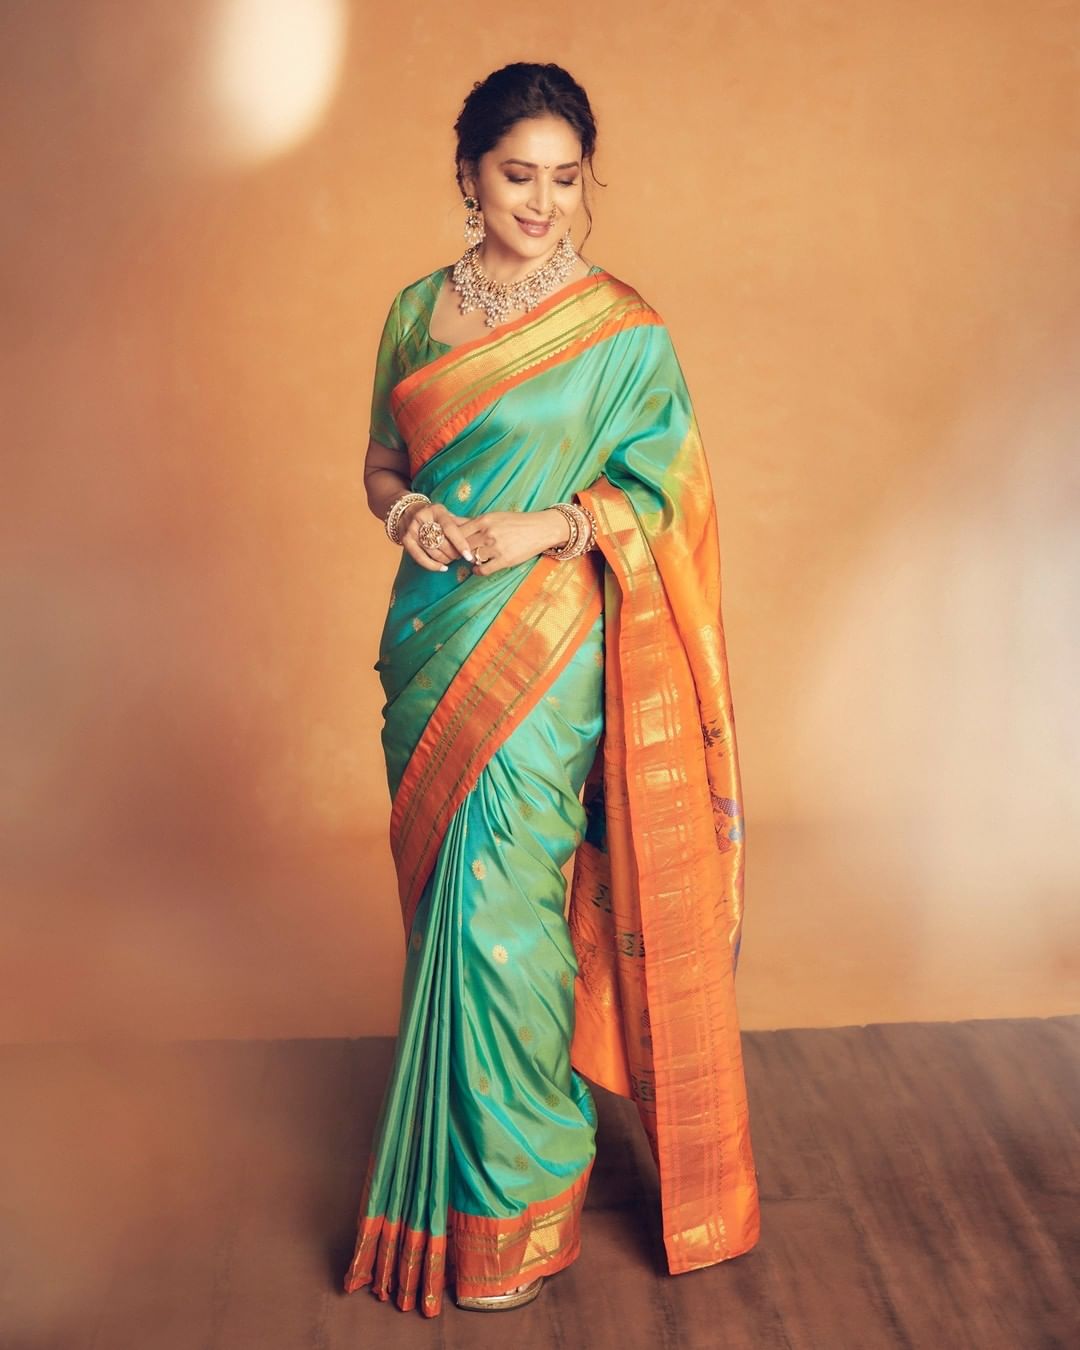 Madhuri Dixit looks gorgeous in the traditional silk saree